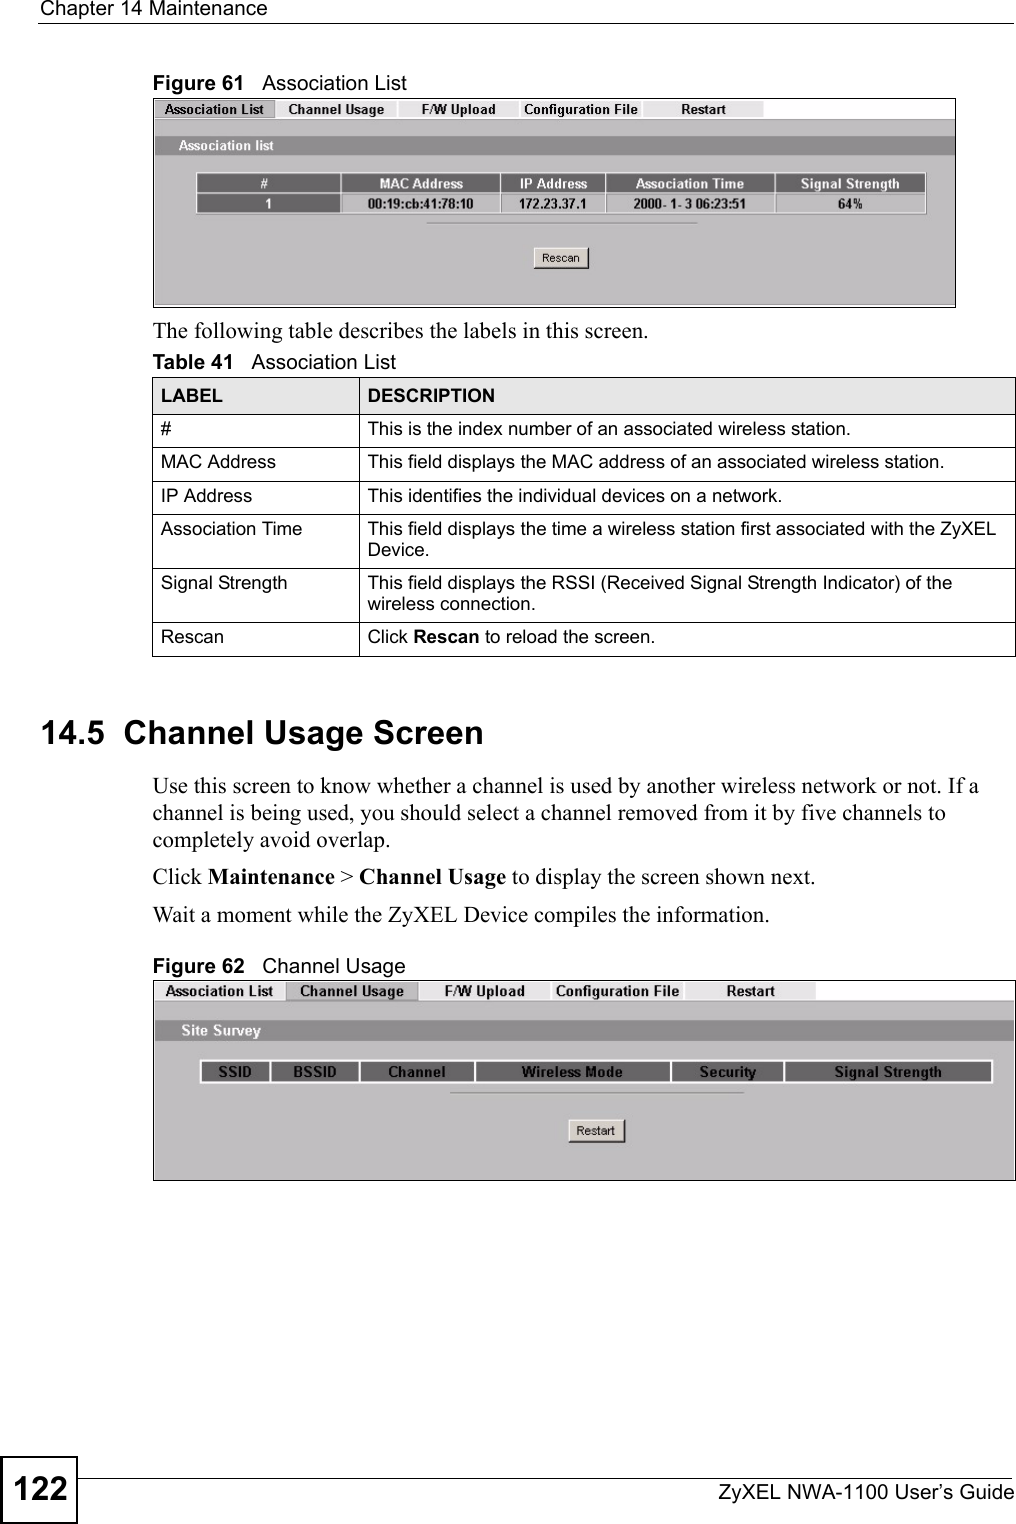 Chapter 14 MaintenanceZyXEL NWA-1100 User’s Guide122Figure 61   Association ListThe following table describes the labels in this screen.14.5  Channel Usage ScreenUse this screen to know whether a channel is used by another wireless network or not. If a channel is being used, you should select a channel removed from it by five channels to completely avoid overlap. Click Maintenance &gt; Channel Usage to display the screen shown next.Wait a moment while the ZyXEL Device compiles the information.Figure 62   Channel UsageTable 41   Association ListLABEL DESCRIPTION#  This is the index number of an associated wireless station. MAC Address  This field displays the MAC address of an associated wireless station.IP Address This identifies the individual devices on a network.Association Time This field displays the time a wireless station first associated with the ZyXEL Device.Signal Strength This field displays the RSSI (Received Signal Strength Indicator) of the wireless connection.Rescan Click Rescan to reload the screen. 